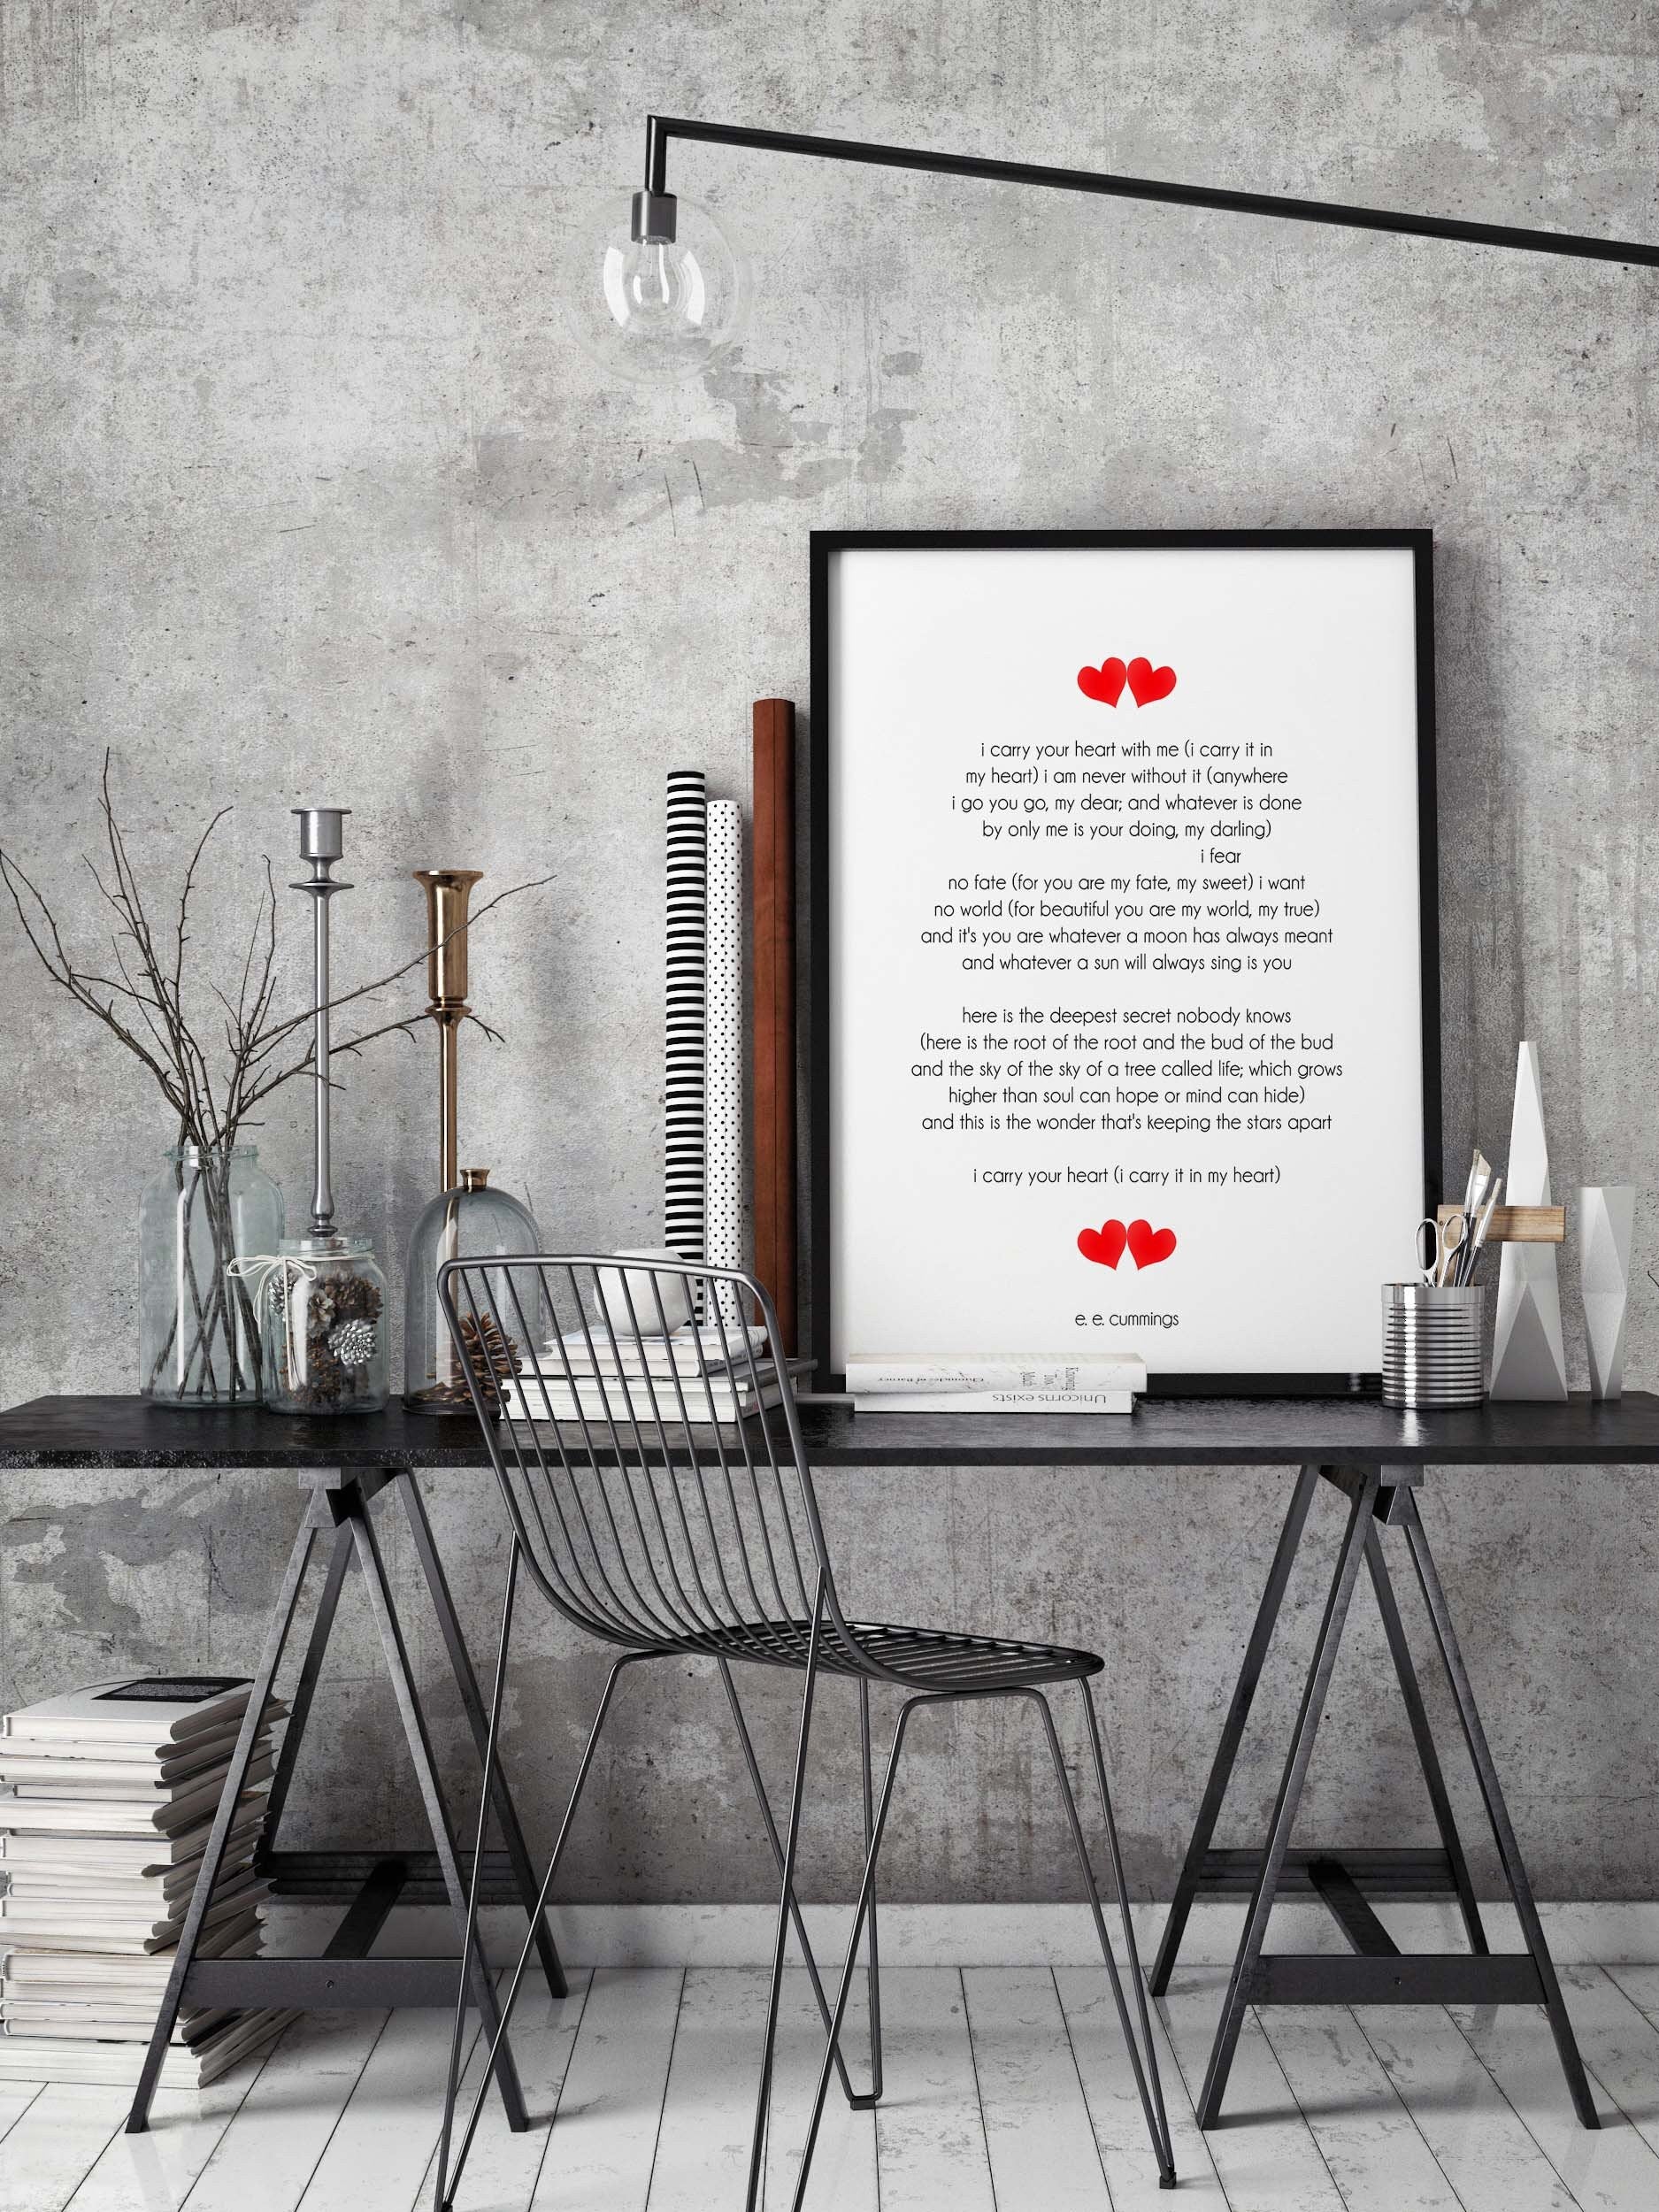 i carry your heart with me e.e. cummings unframed poem print, personalised i carry it in my heart poetry wall art